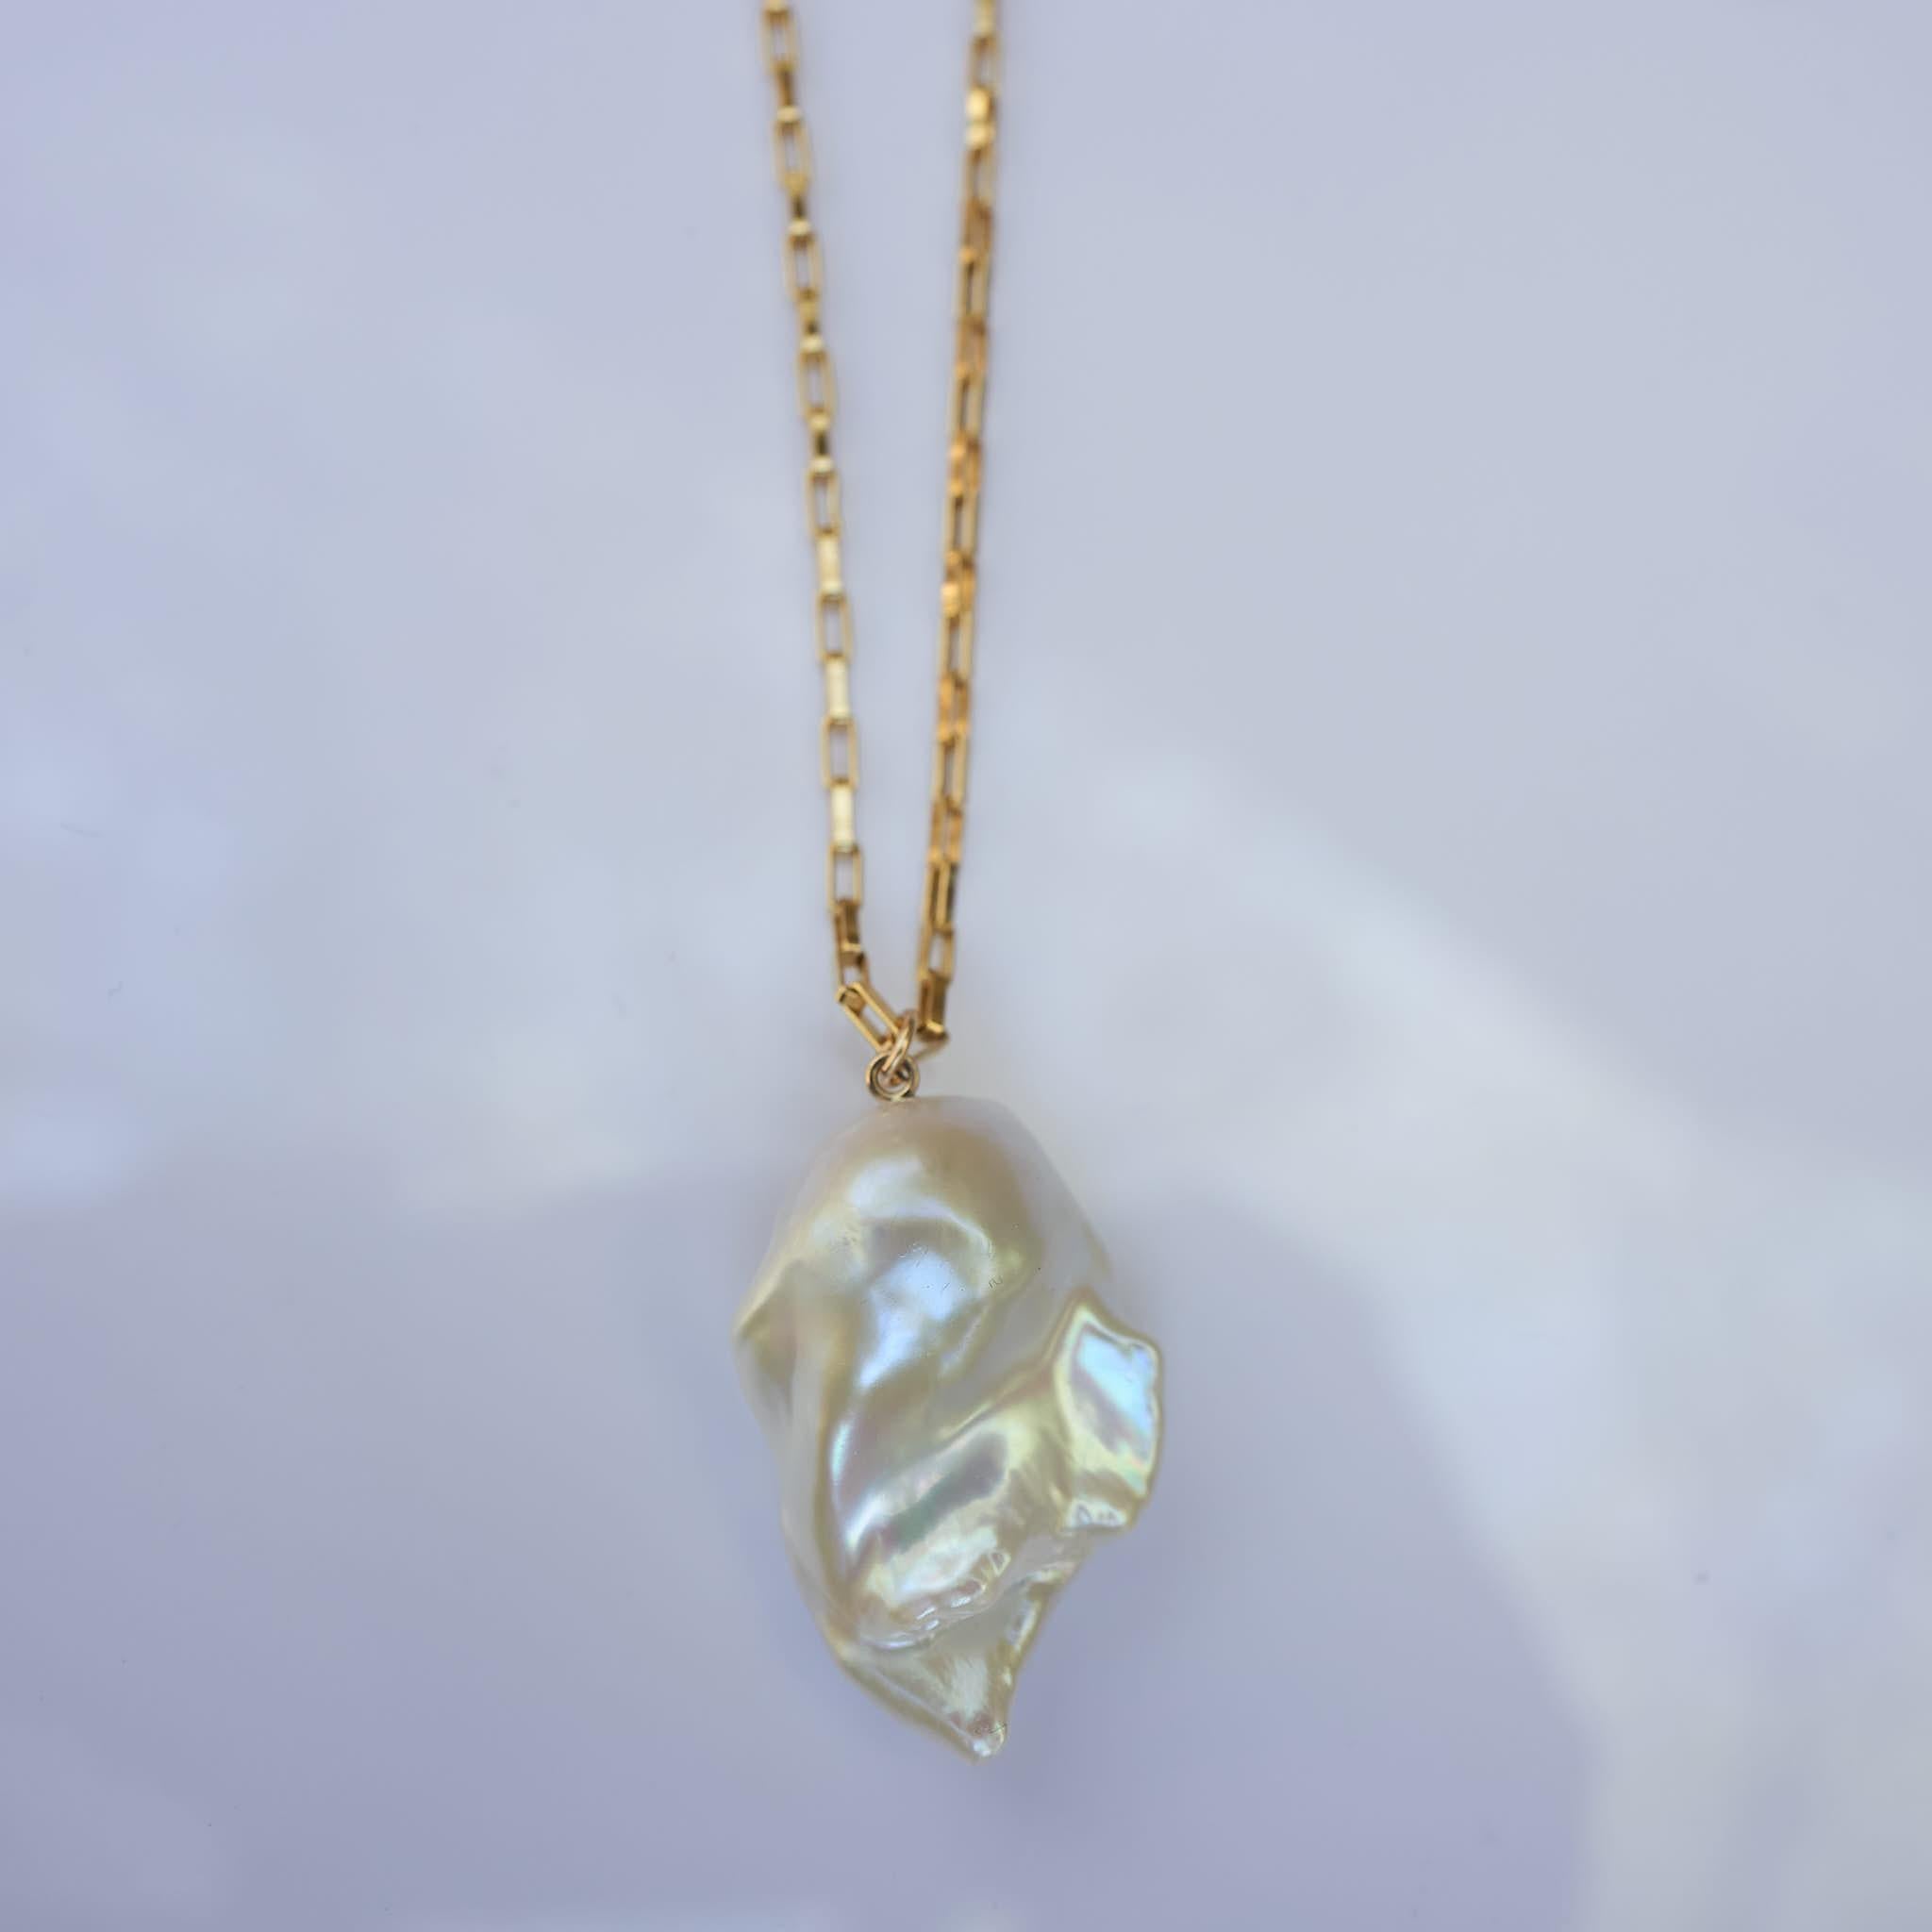 White Pearl Drop Pendant Chain Necklace J Dauphin In New Condition For Sale In Los Angeles, CA